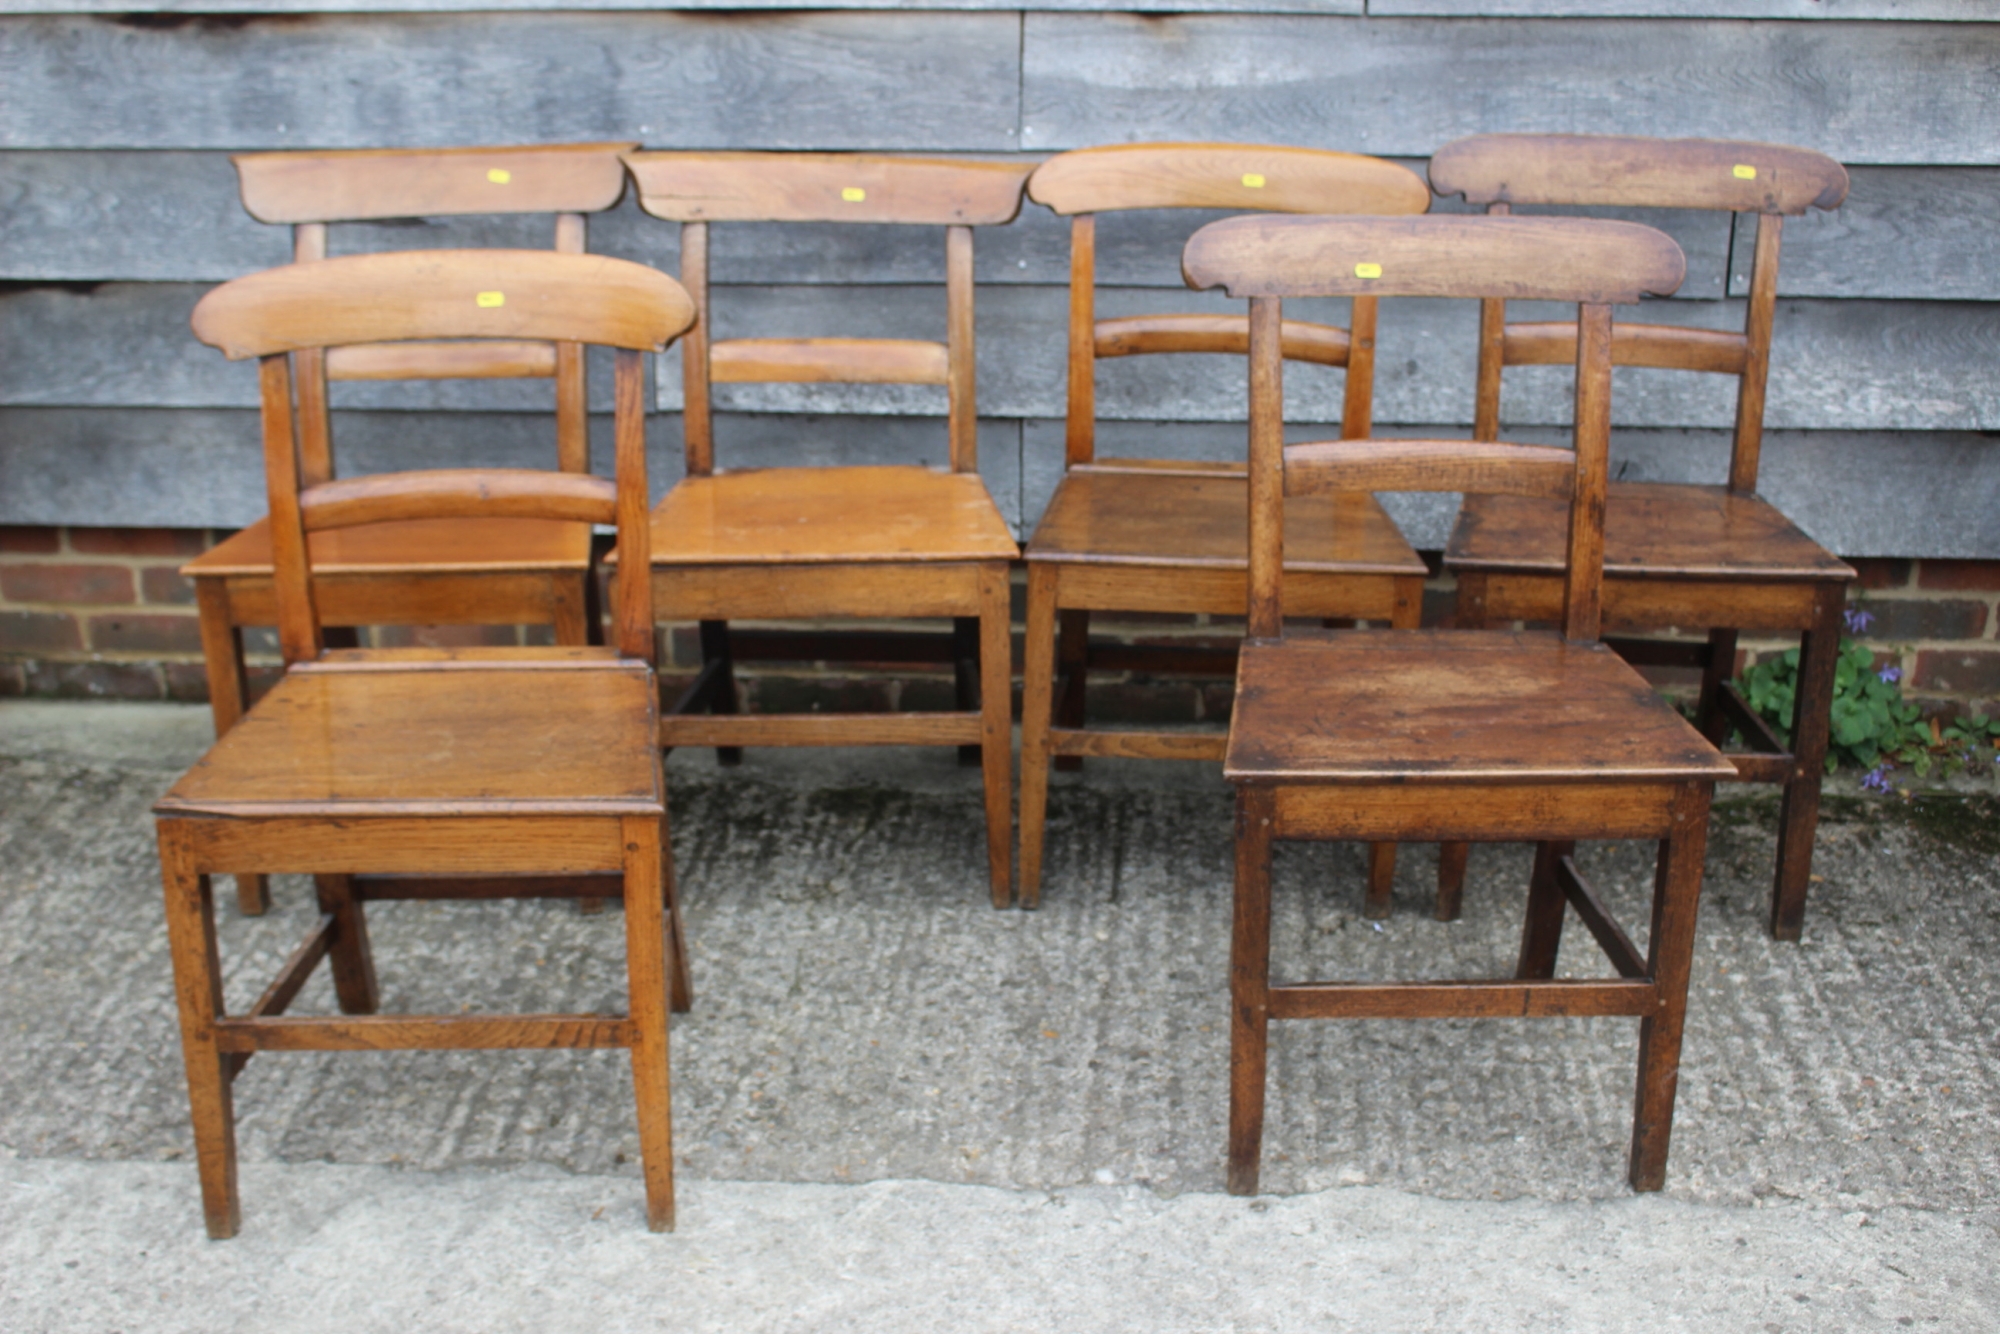 A Harlequin set of six 19th century oak bar back dining chairs with panel seats and stretchered